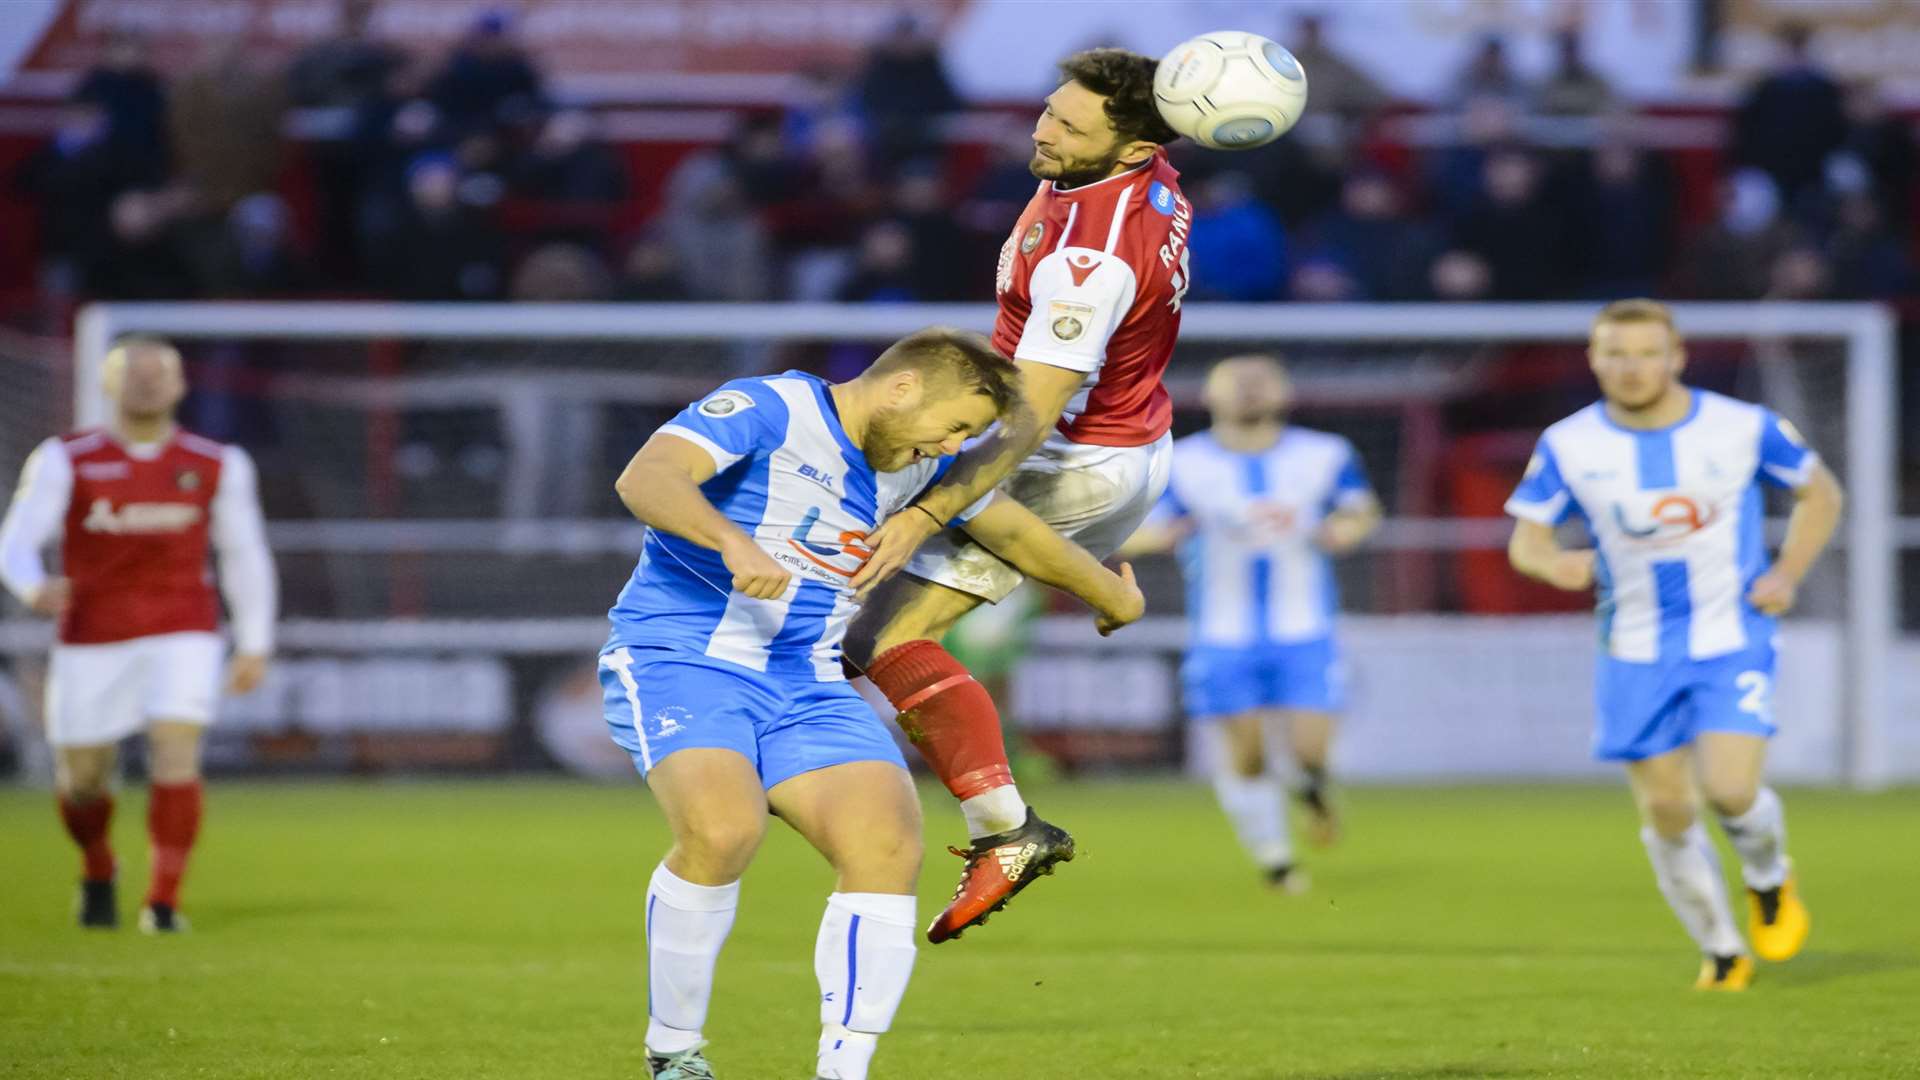 Dean Rance gets airborne against Hartlepool Picture: Andy Payton